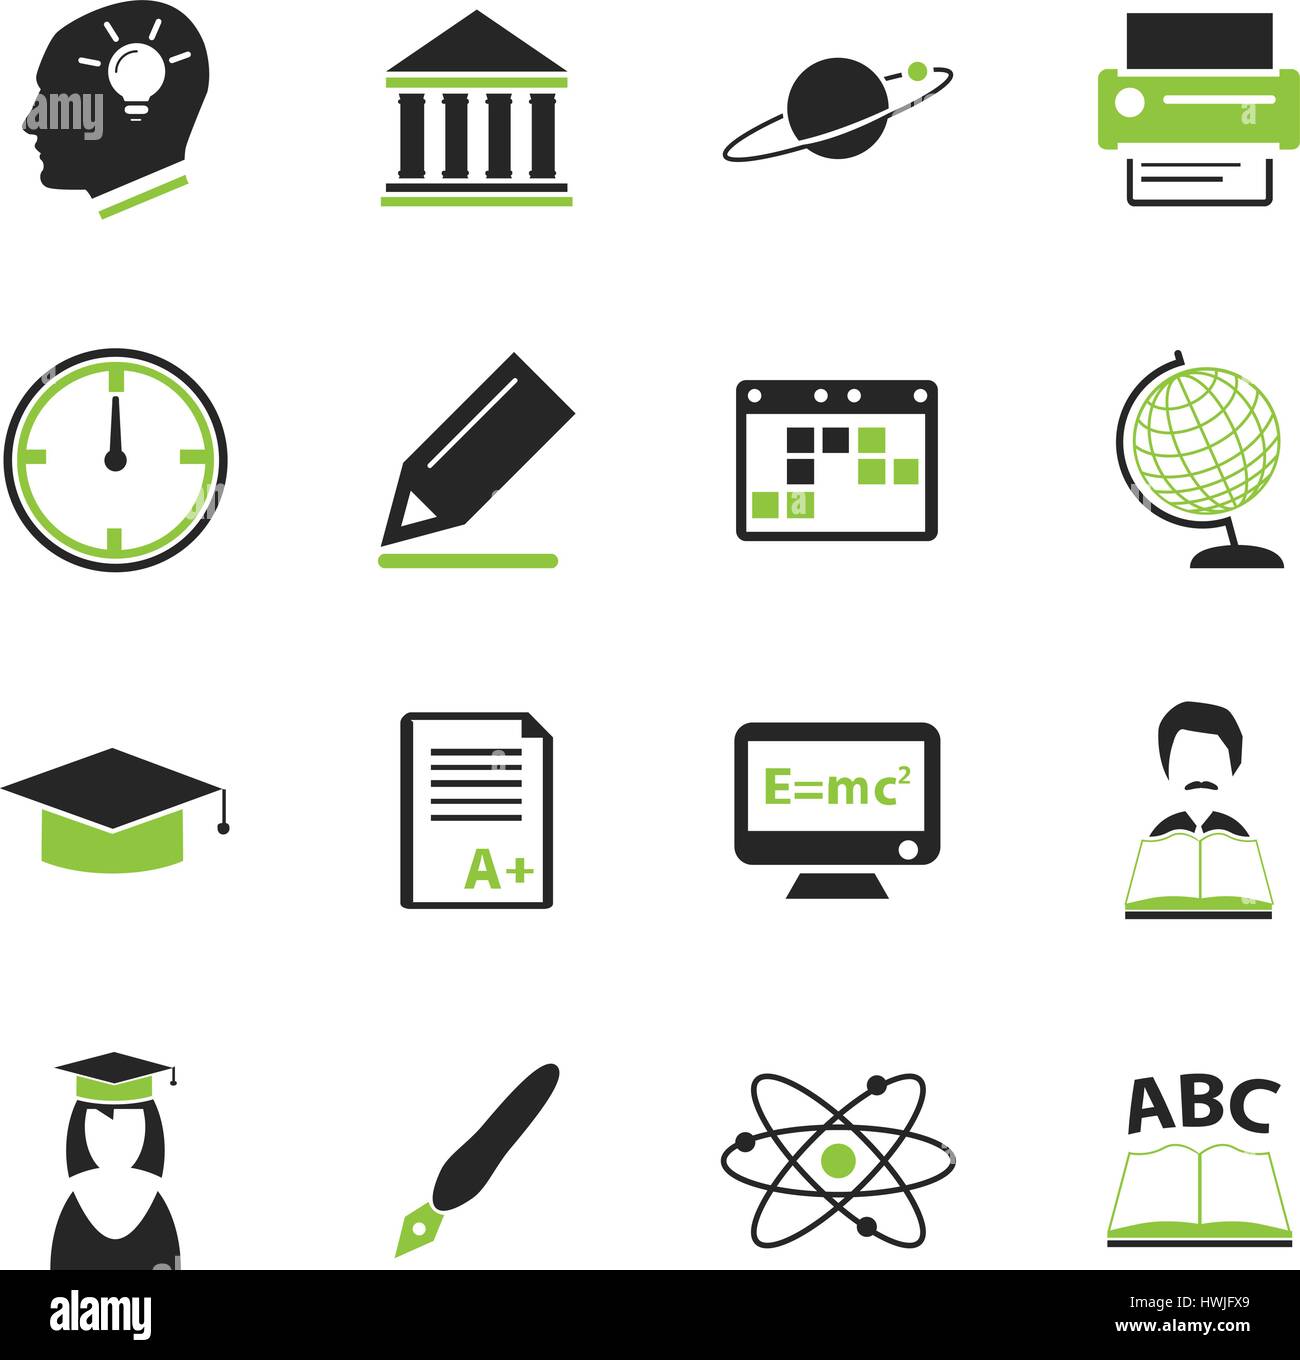 University simply icons for web and user interfaces Stock Vector